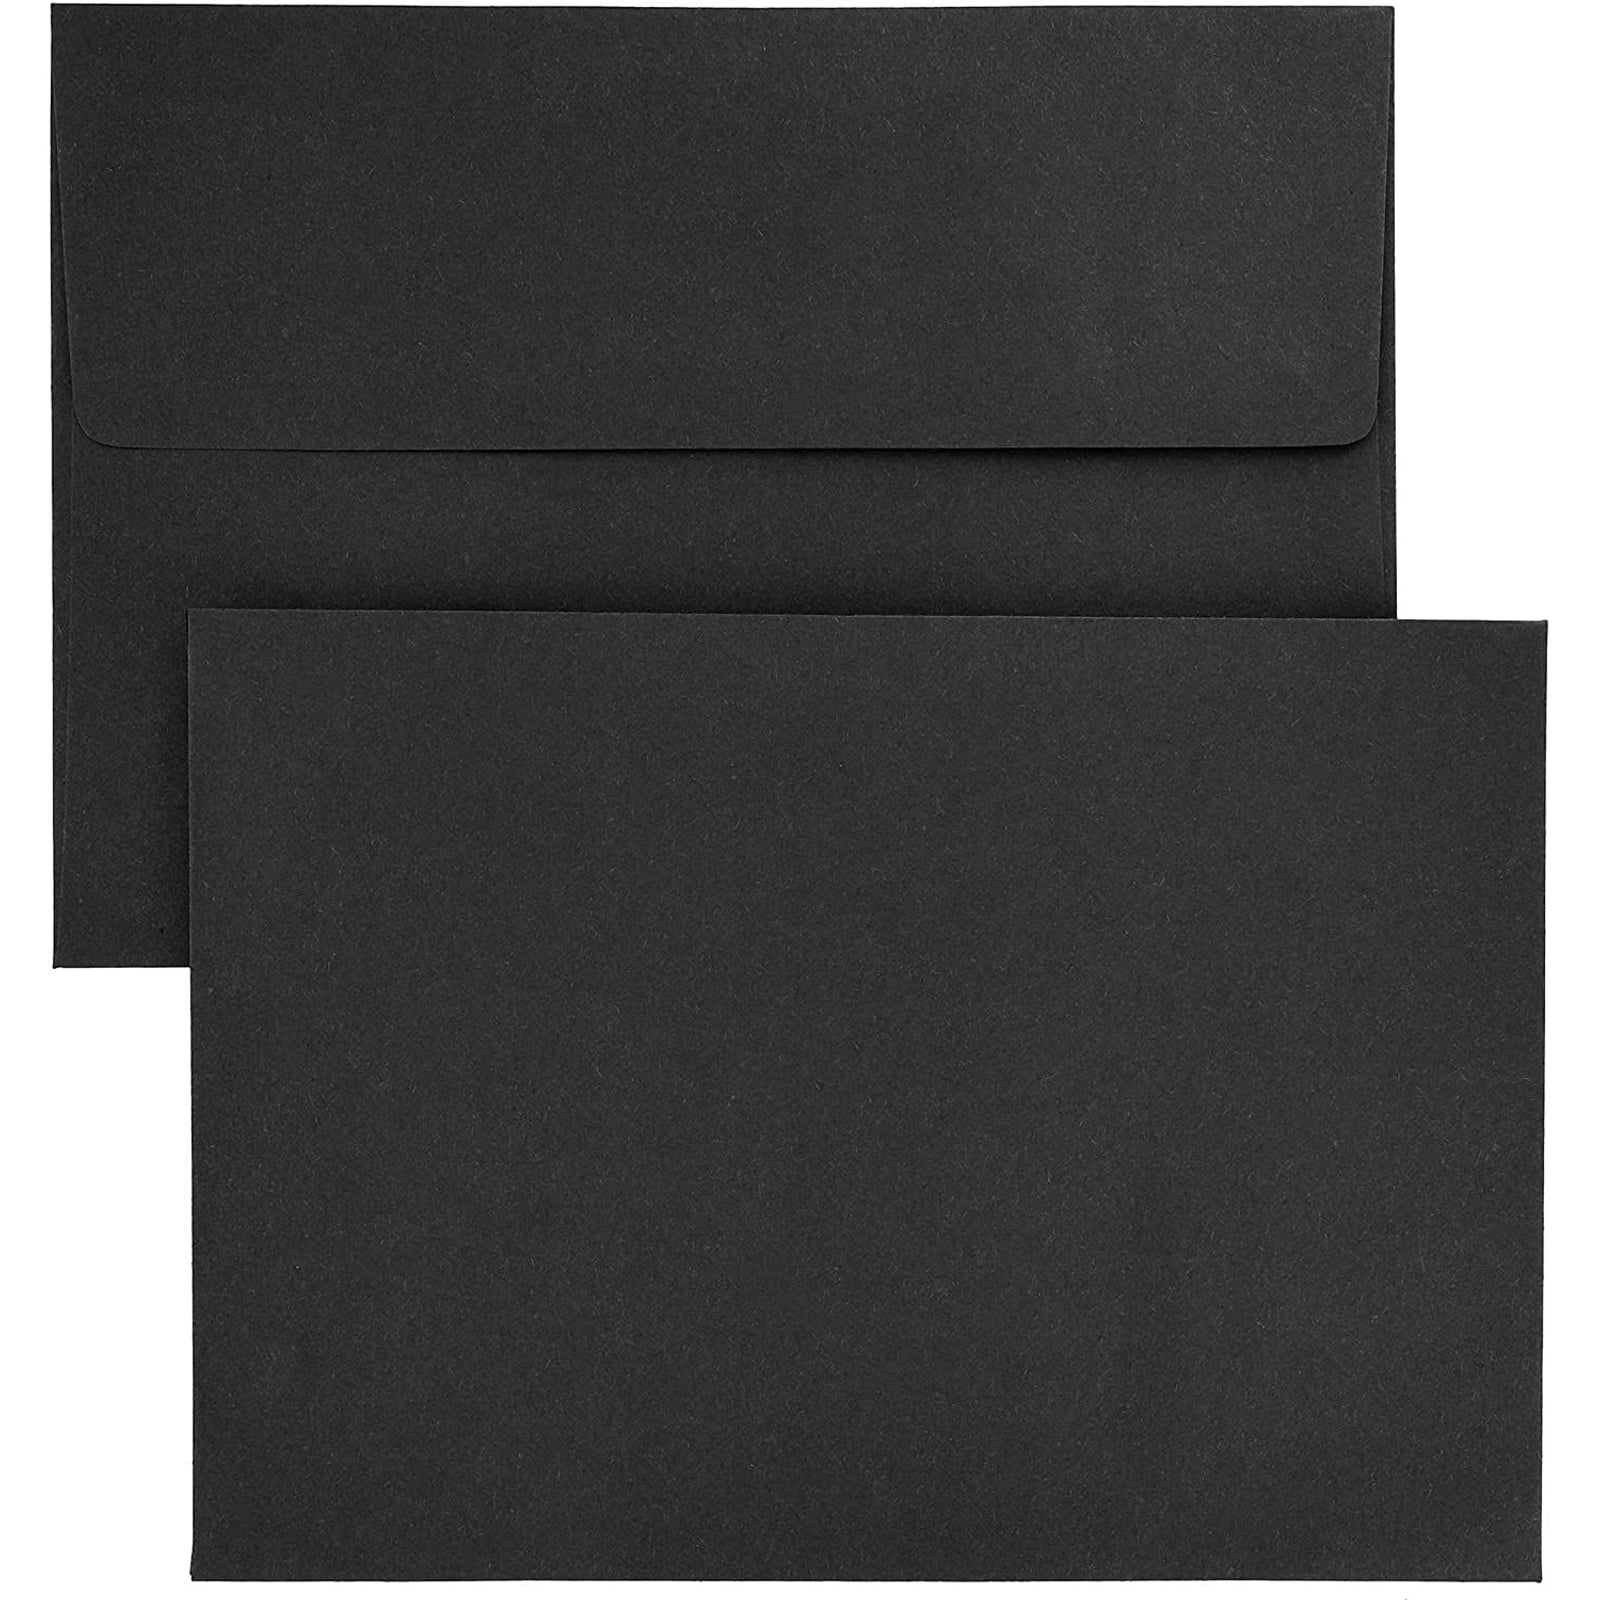 DVDs or Invitations FREE SHIP! 5.25” x 5.25” cardboard mailer Great for CDs 